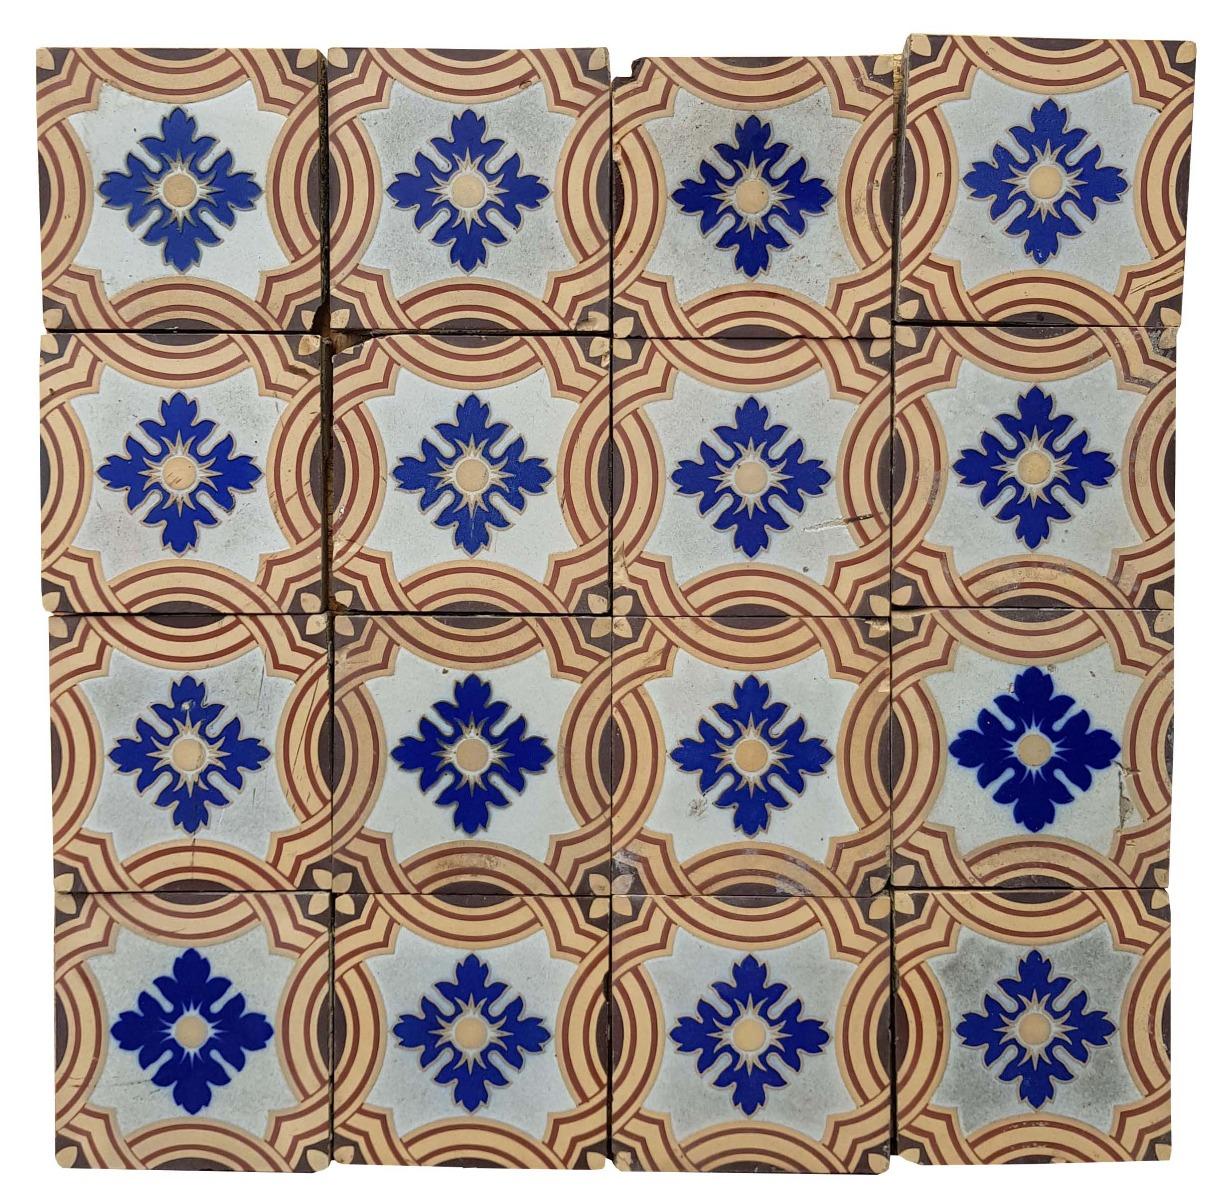 These stunning floor tiles were made by ‘Minton & Co.’ in Stoke on Trent.

These tiles are grade 1. 

There are 30 tiles in this listing.

Each tile 15.3 x 15.3 cm (6